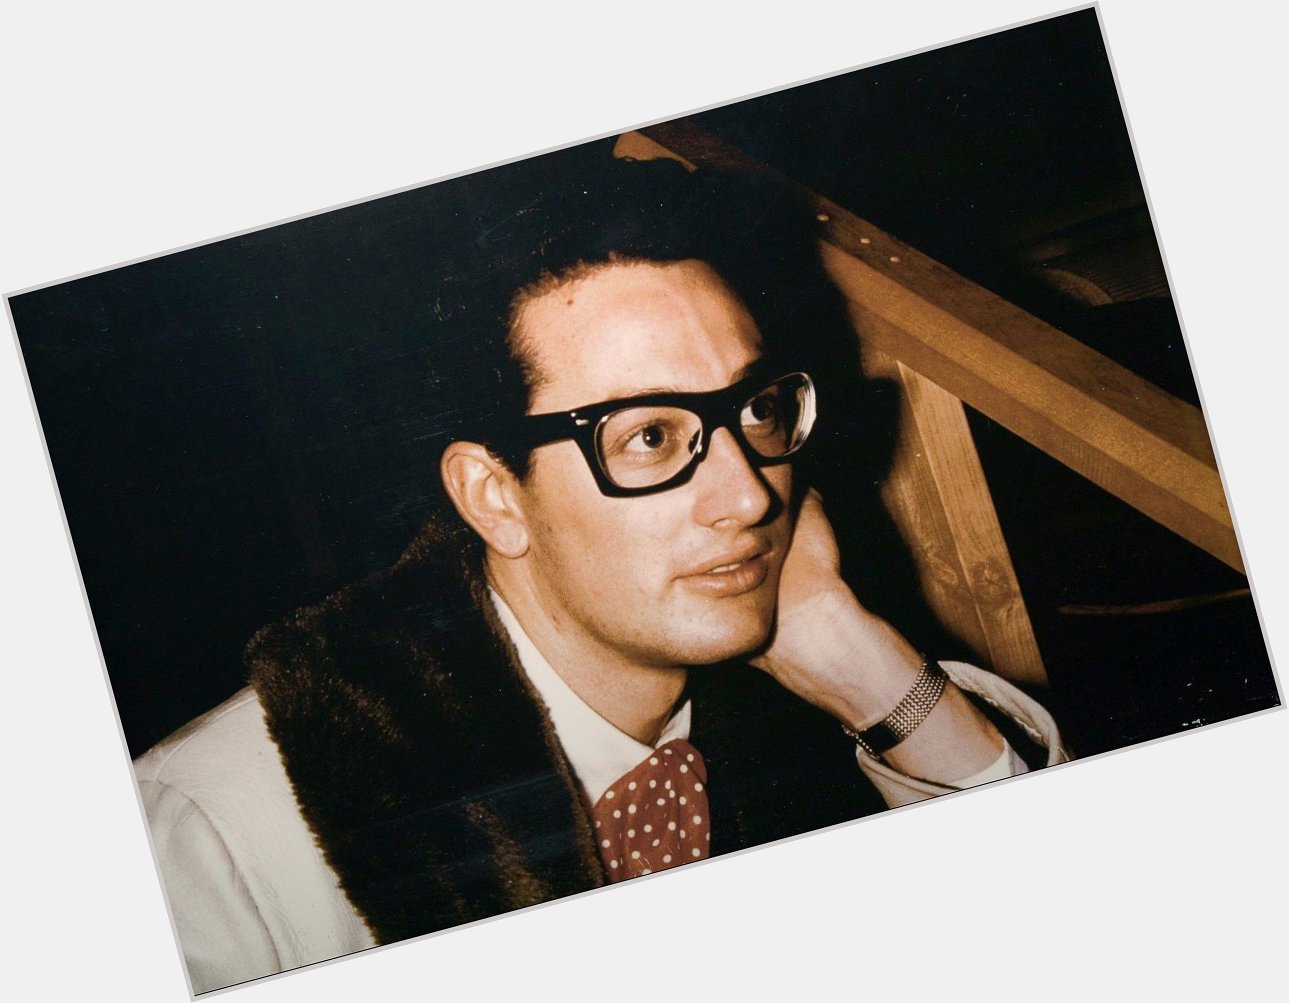 Happy 82nd birthday to Buddy Holly, the man who started it all.  